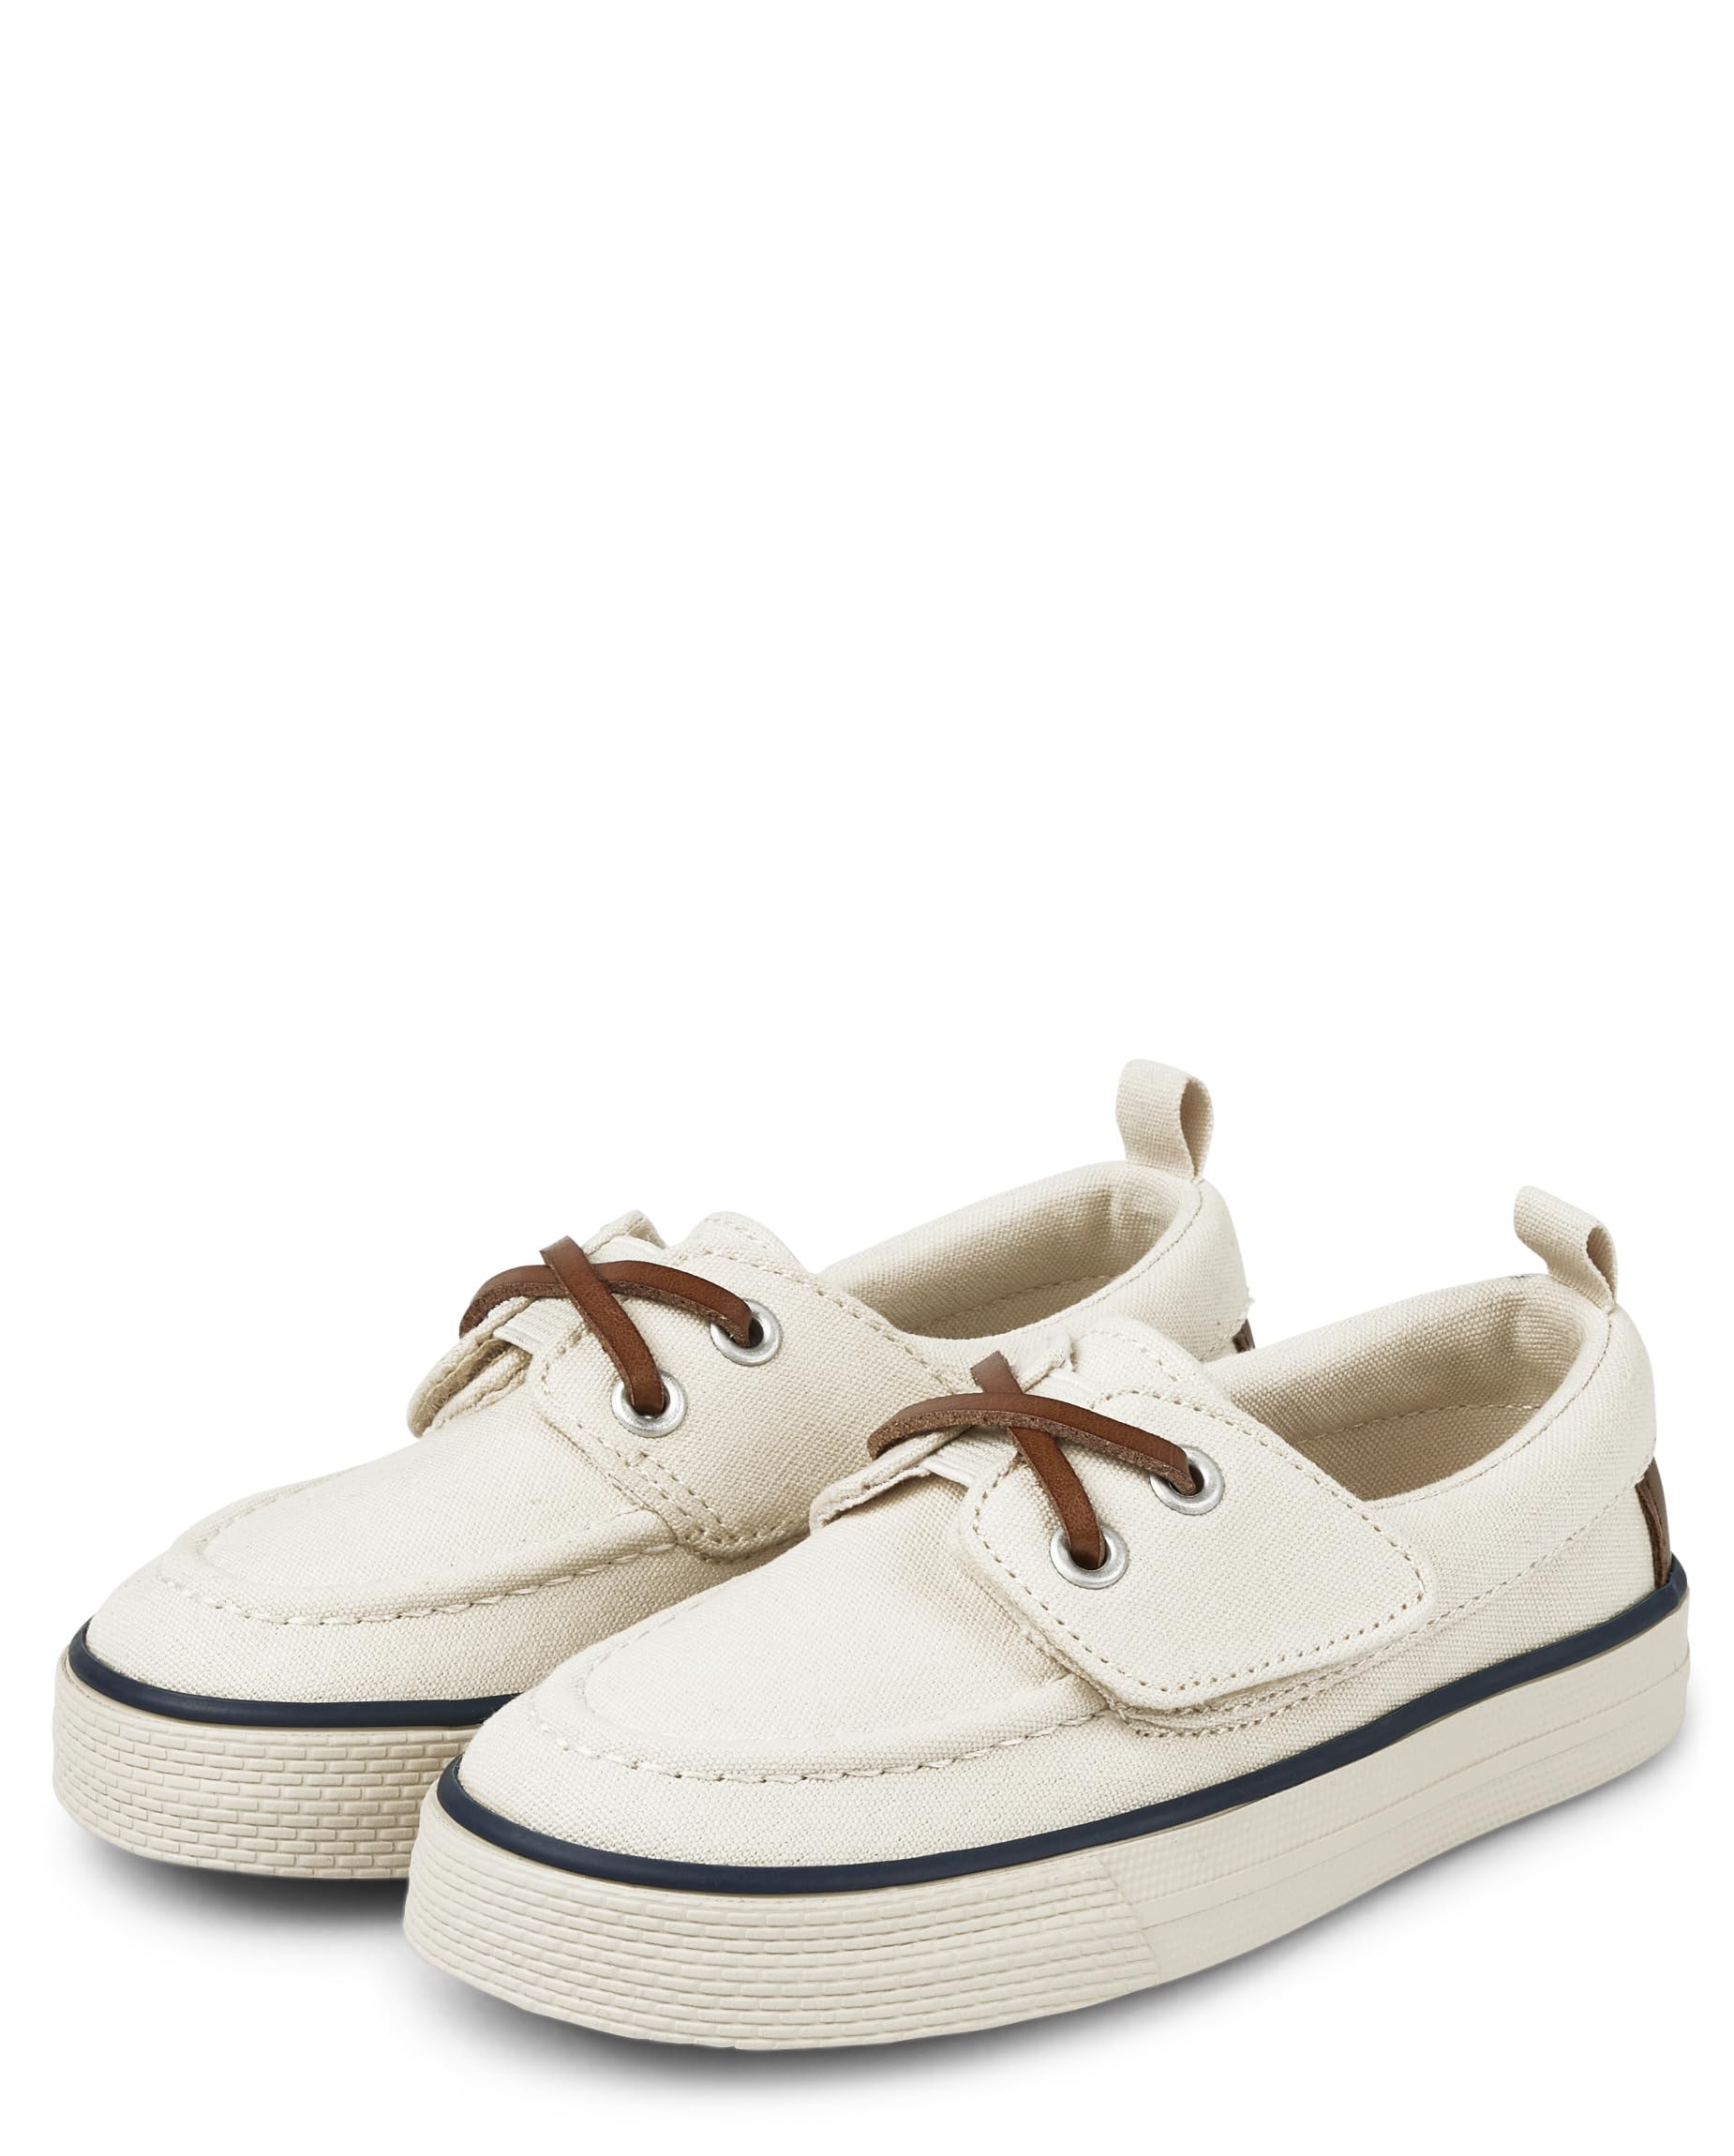 Gymboree Boy's and Toddler Boat Shoe